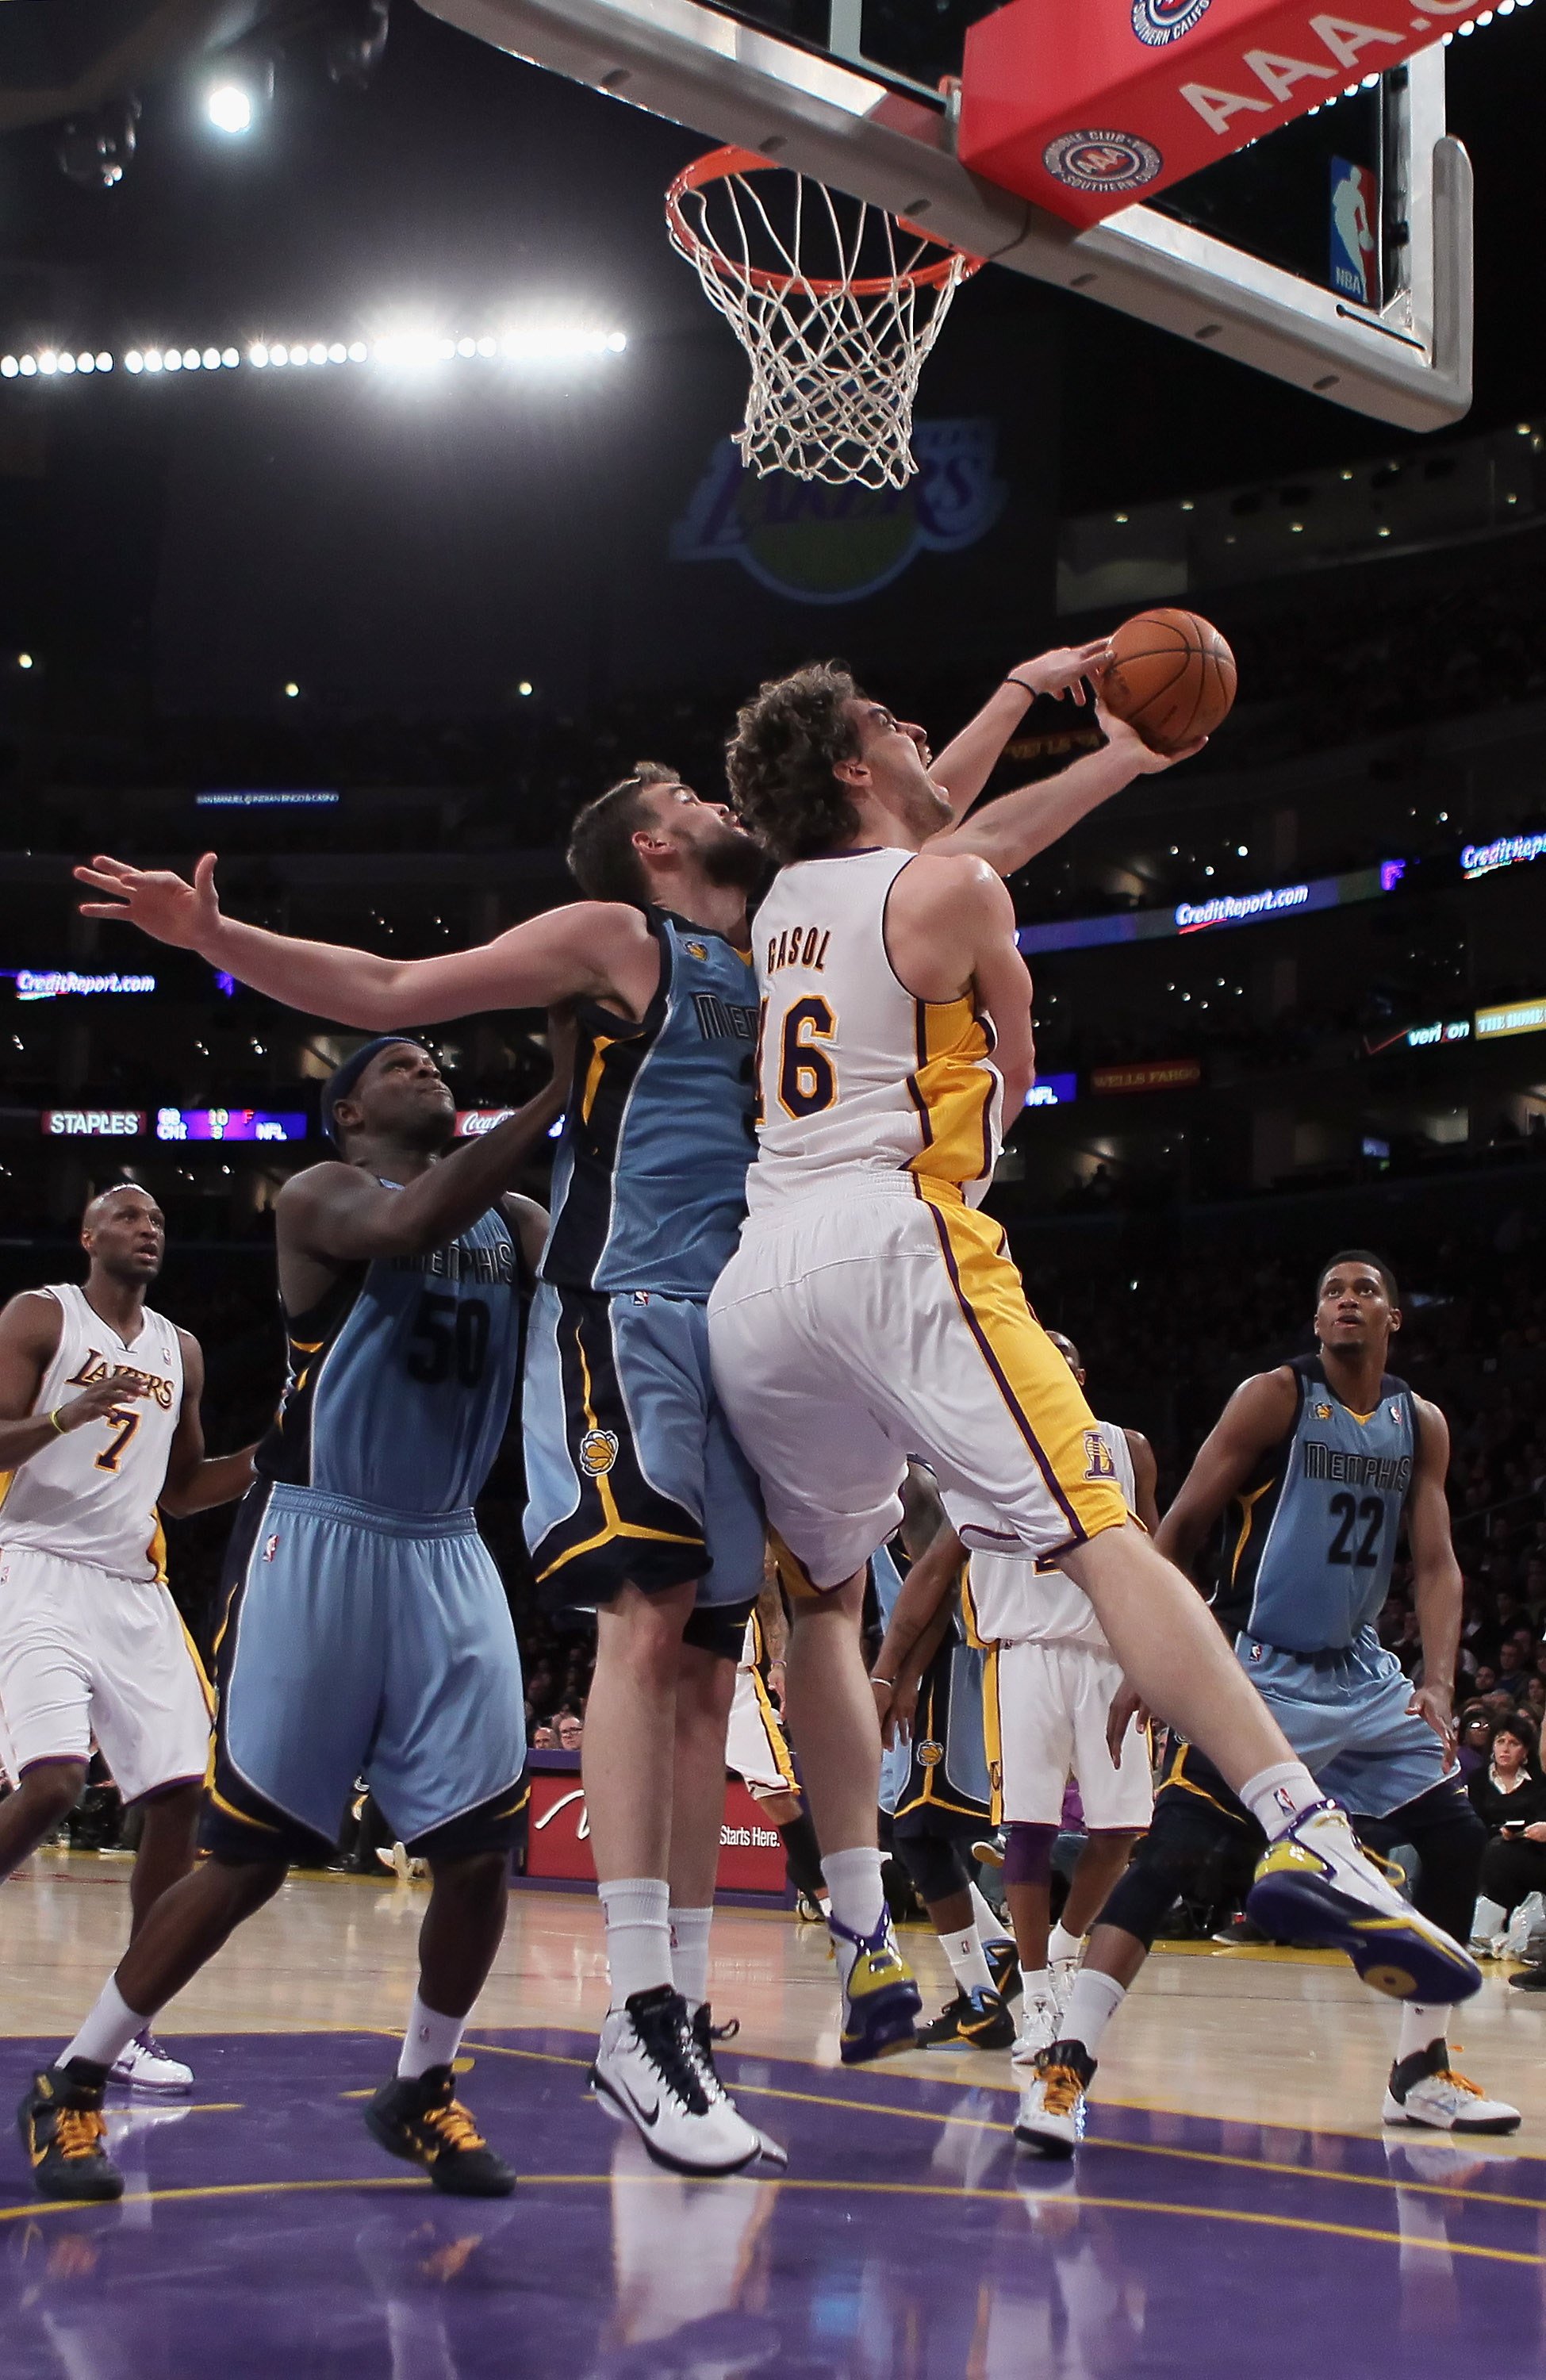 Lakers embarrassed in worst loss of season to Bobcats